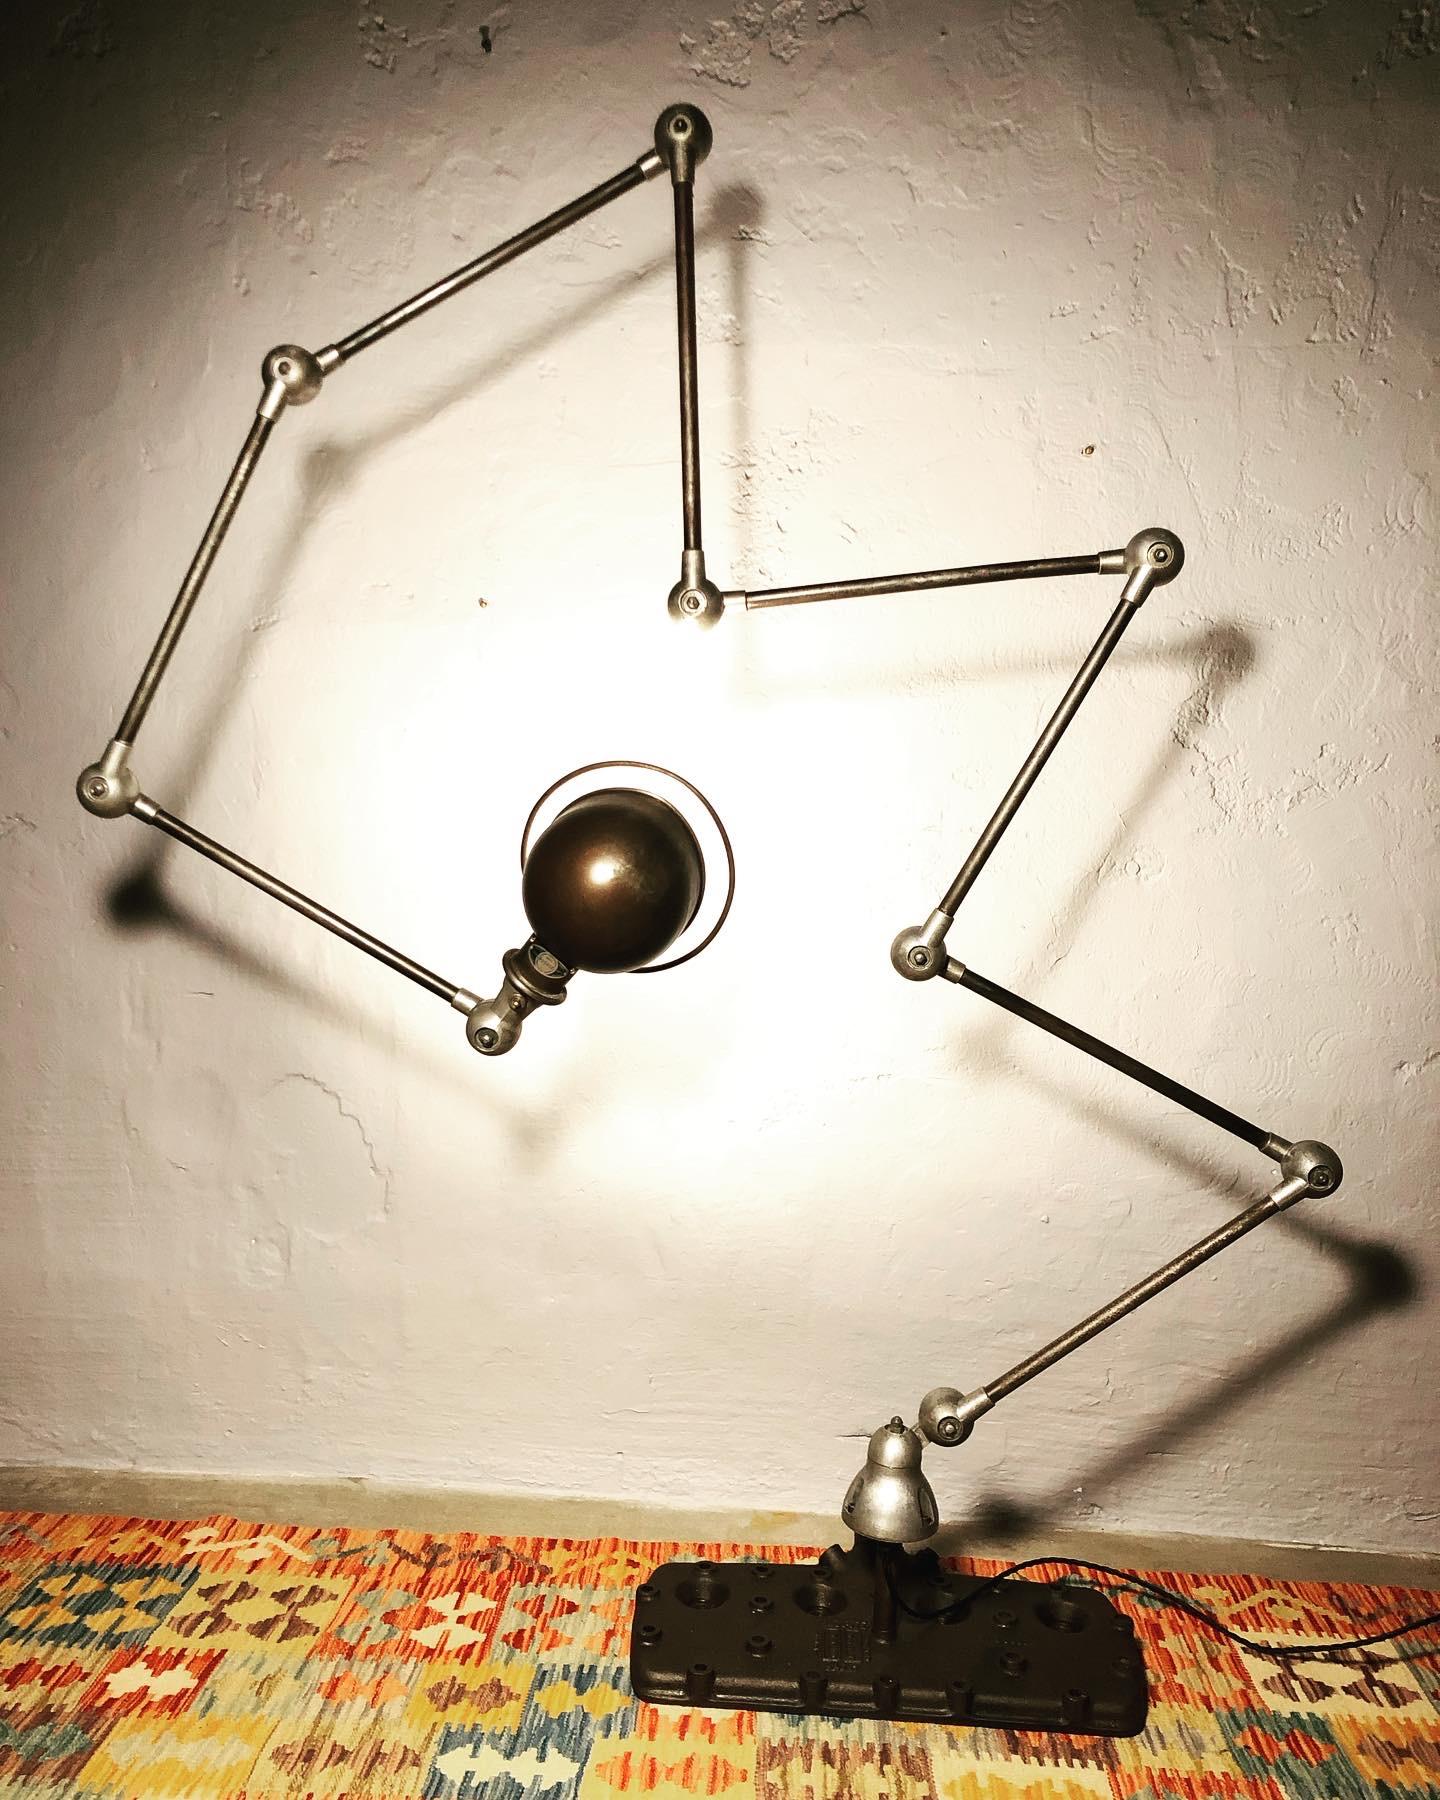 An iconic 8 arm mid century industrial work lamp by Jielde. 
This 8 arm industrial lamp is mounted onto a vintage V8 flathead. 
This is not just a lamp it is a work of art and incredibly sculptural.
The flathead is a perfect base for this lamp